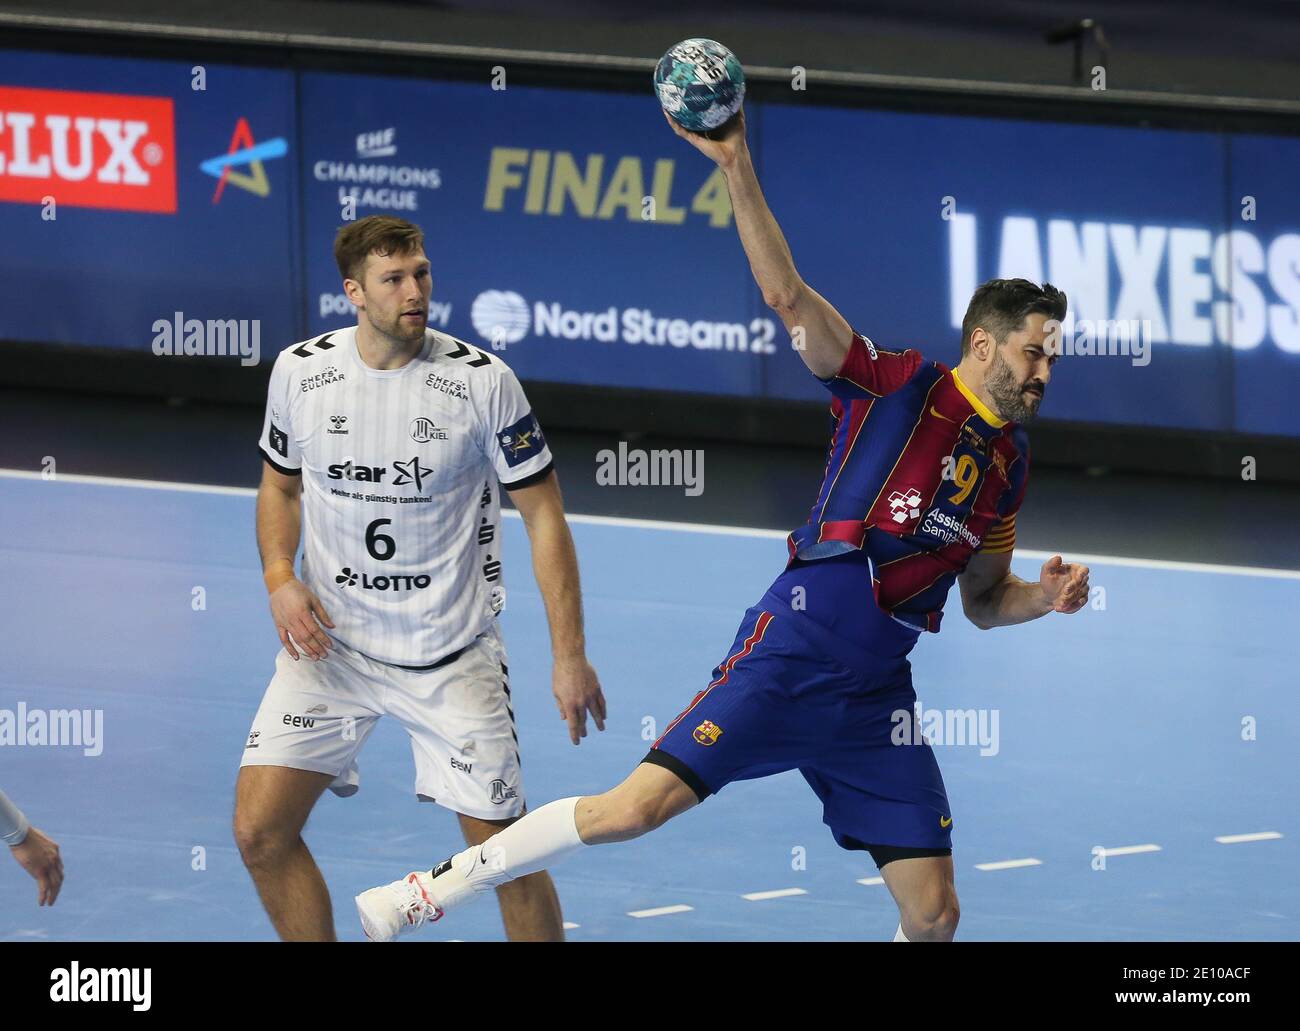 Harald Reinkind of THW Kiel and Raul Entrerrios Rodriguez of FC Barcelone during the EHF Champions League, Final Four, Final handball match between THW Kiel and FC Barcelona on December 29, 2020